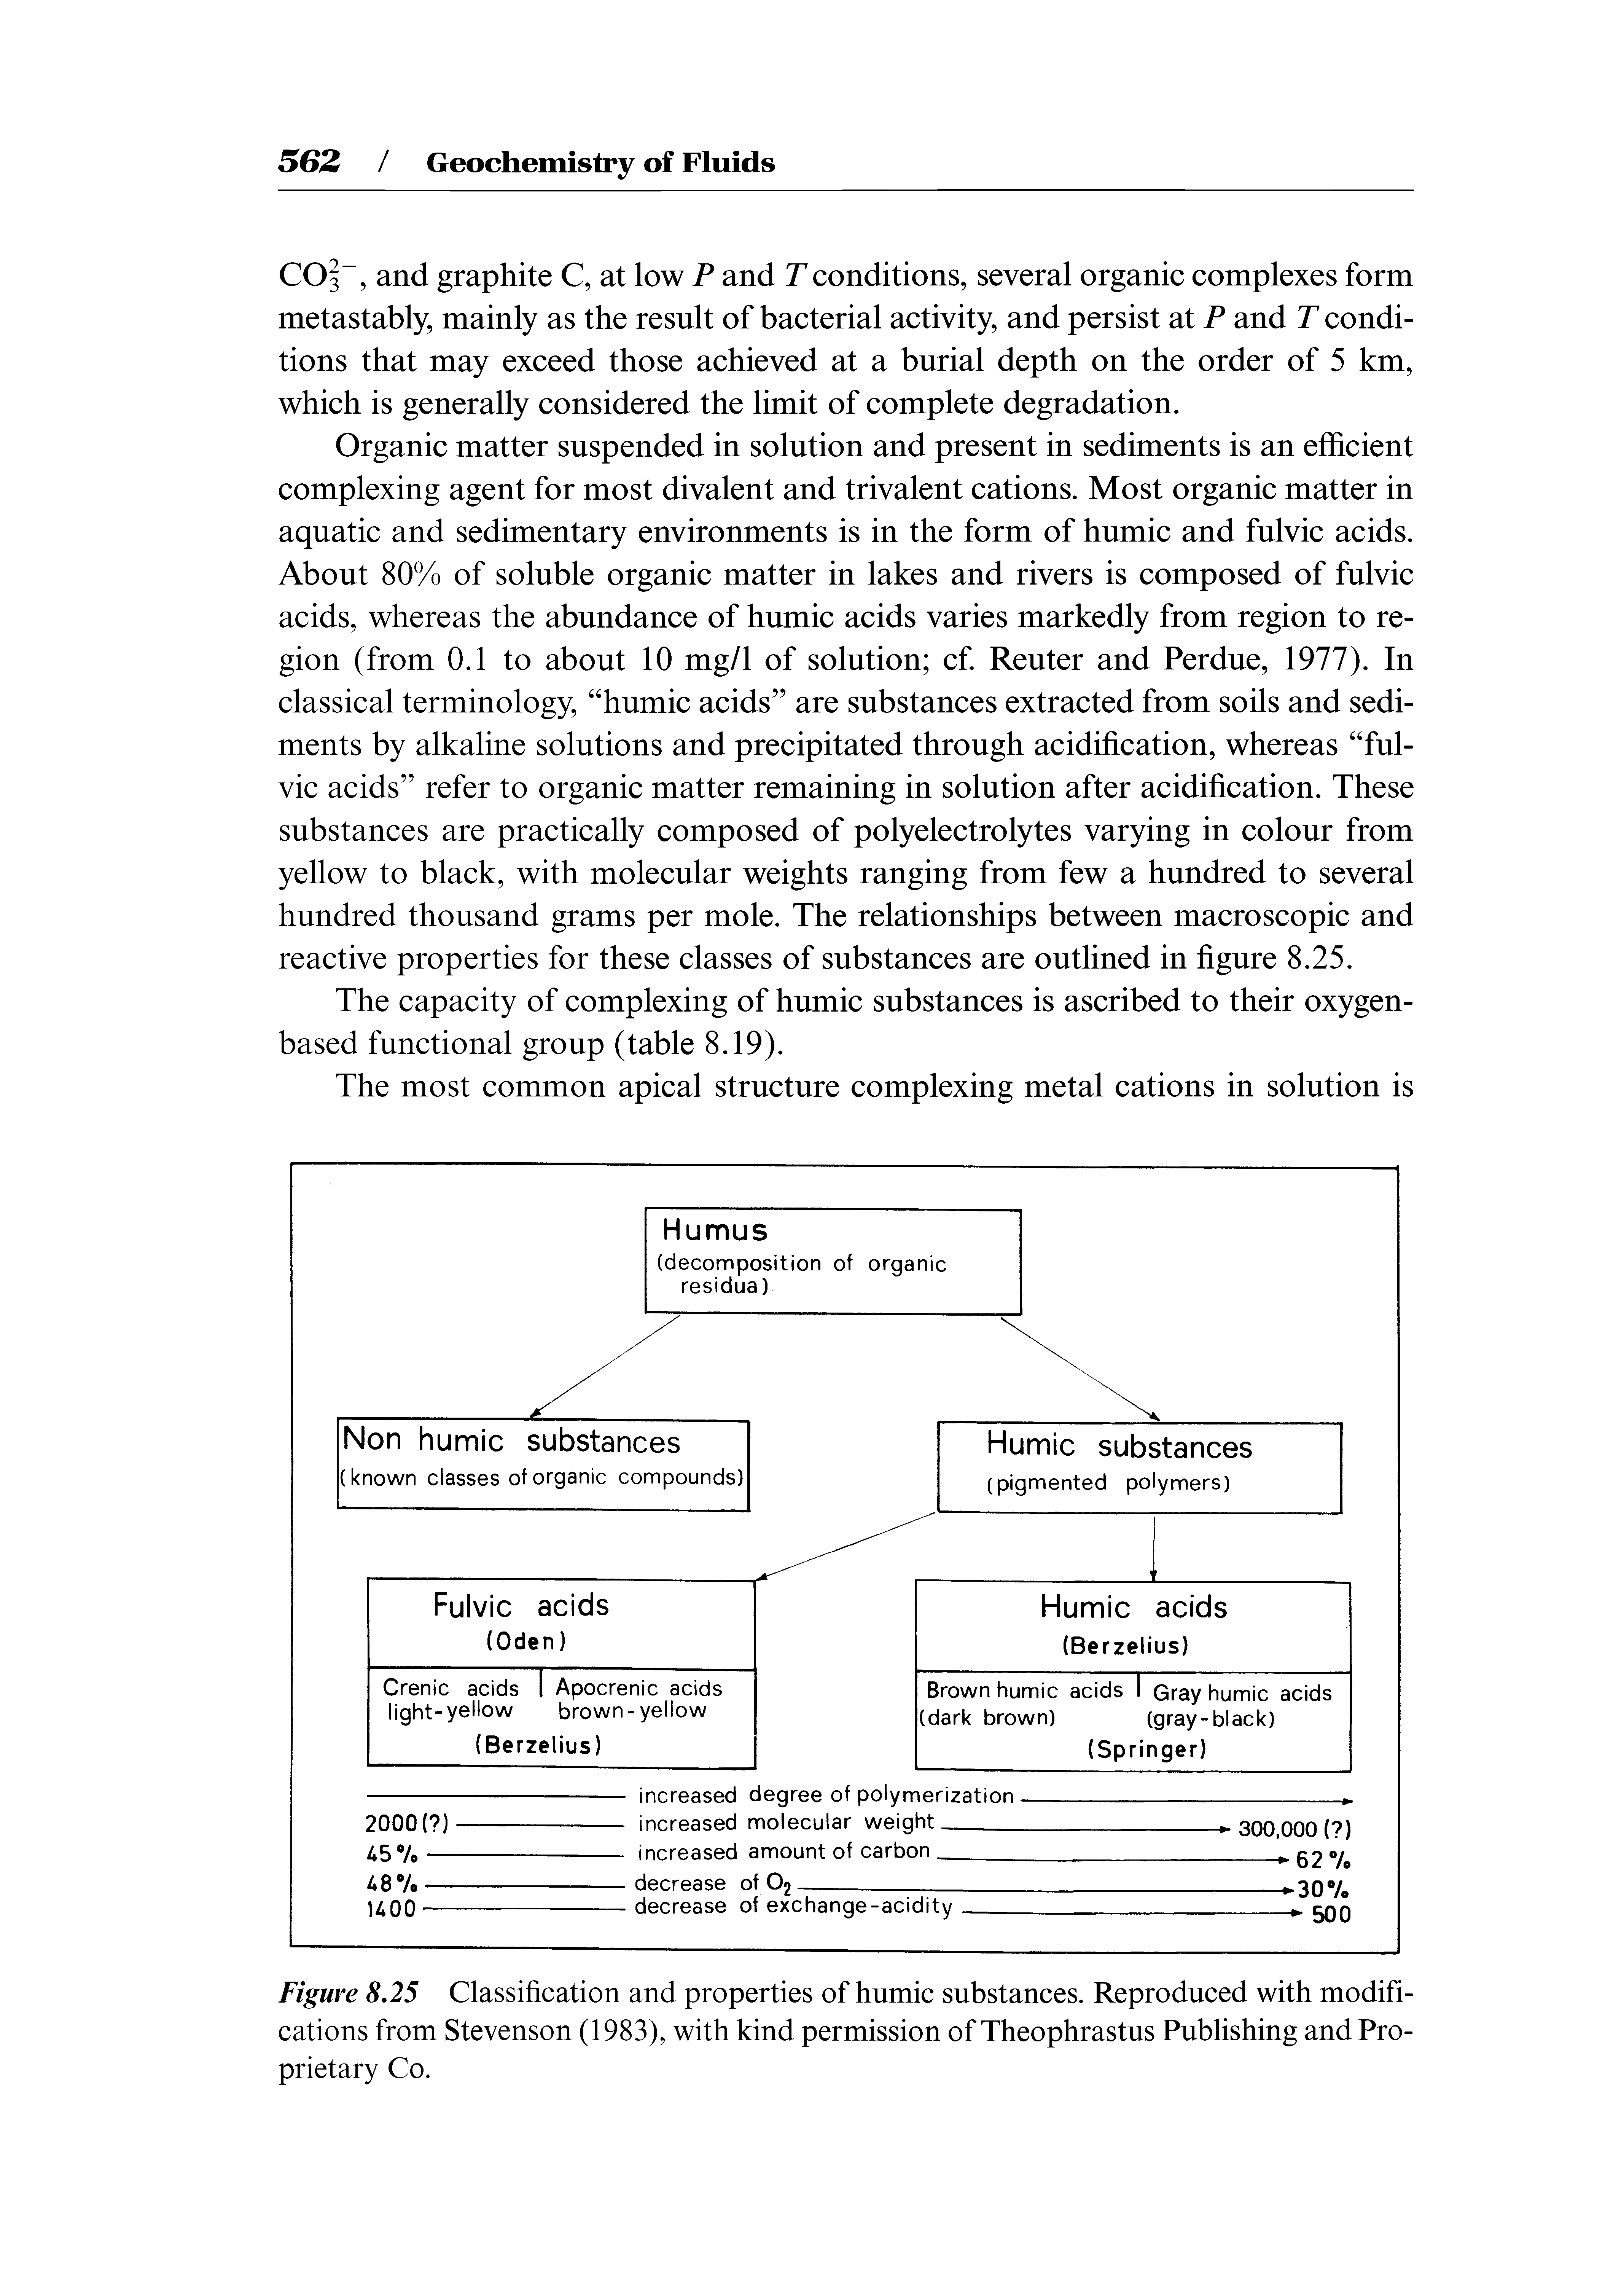 Figure 8,25 Classification and properties of humic substances. Reproduced with modifications from Stevenson (1983), with kind permission of Theophrastus Publishing and Proprietary Co.